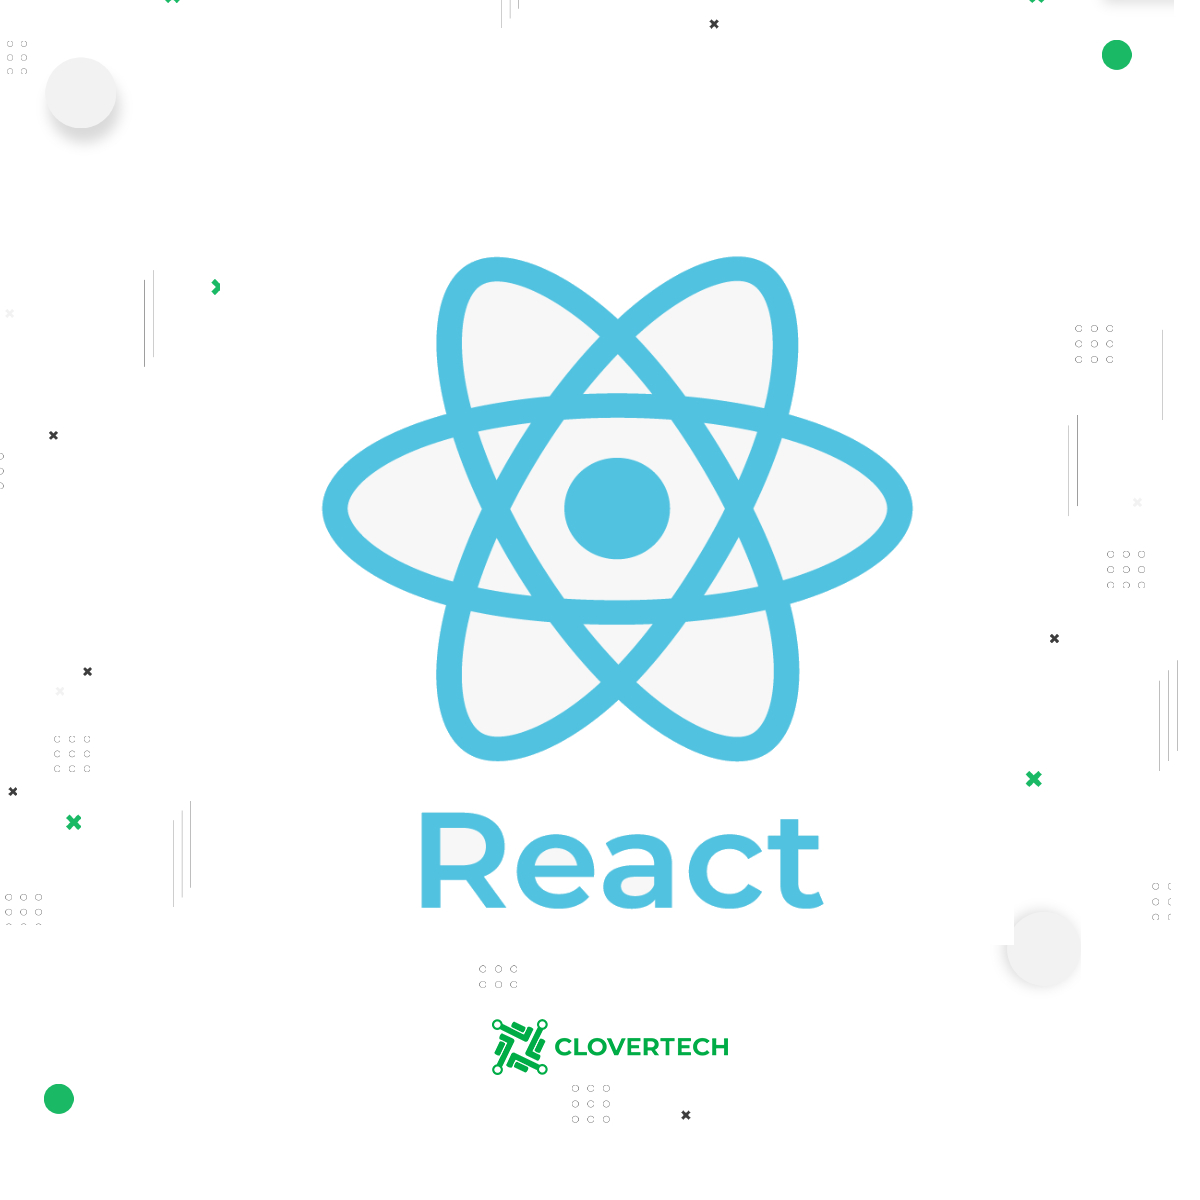 Information You Need to Know About ReactJS Before Using It in Your Project